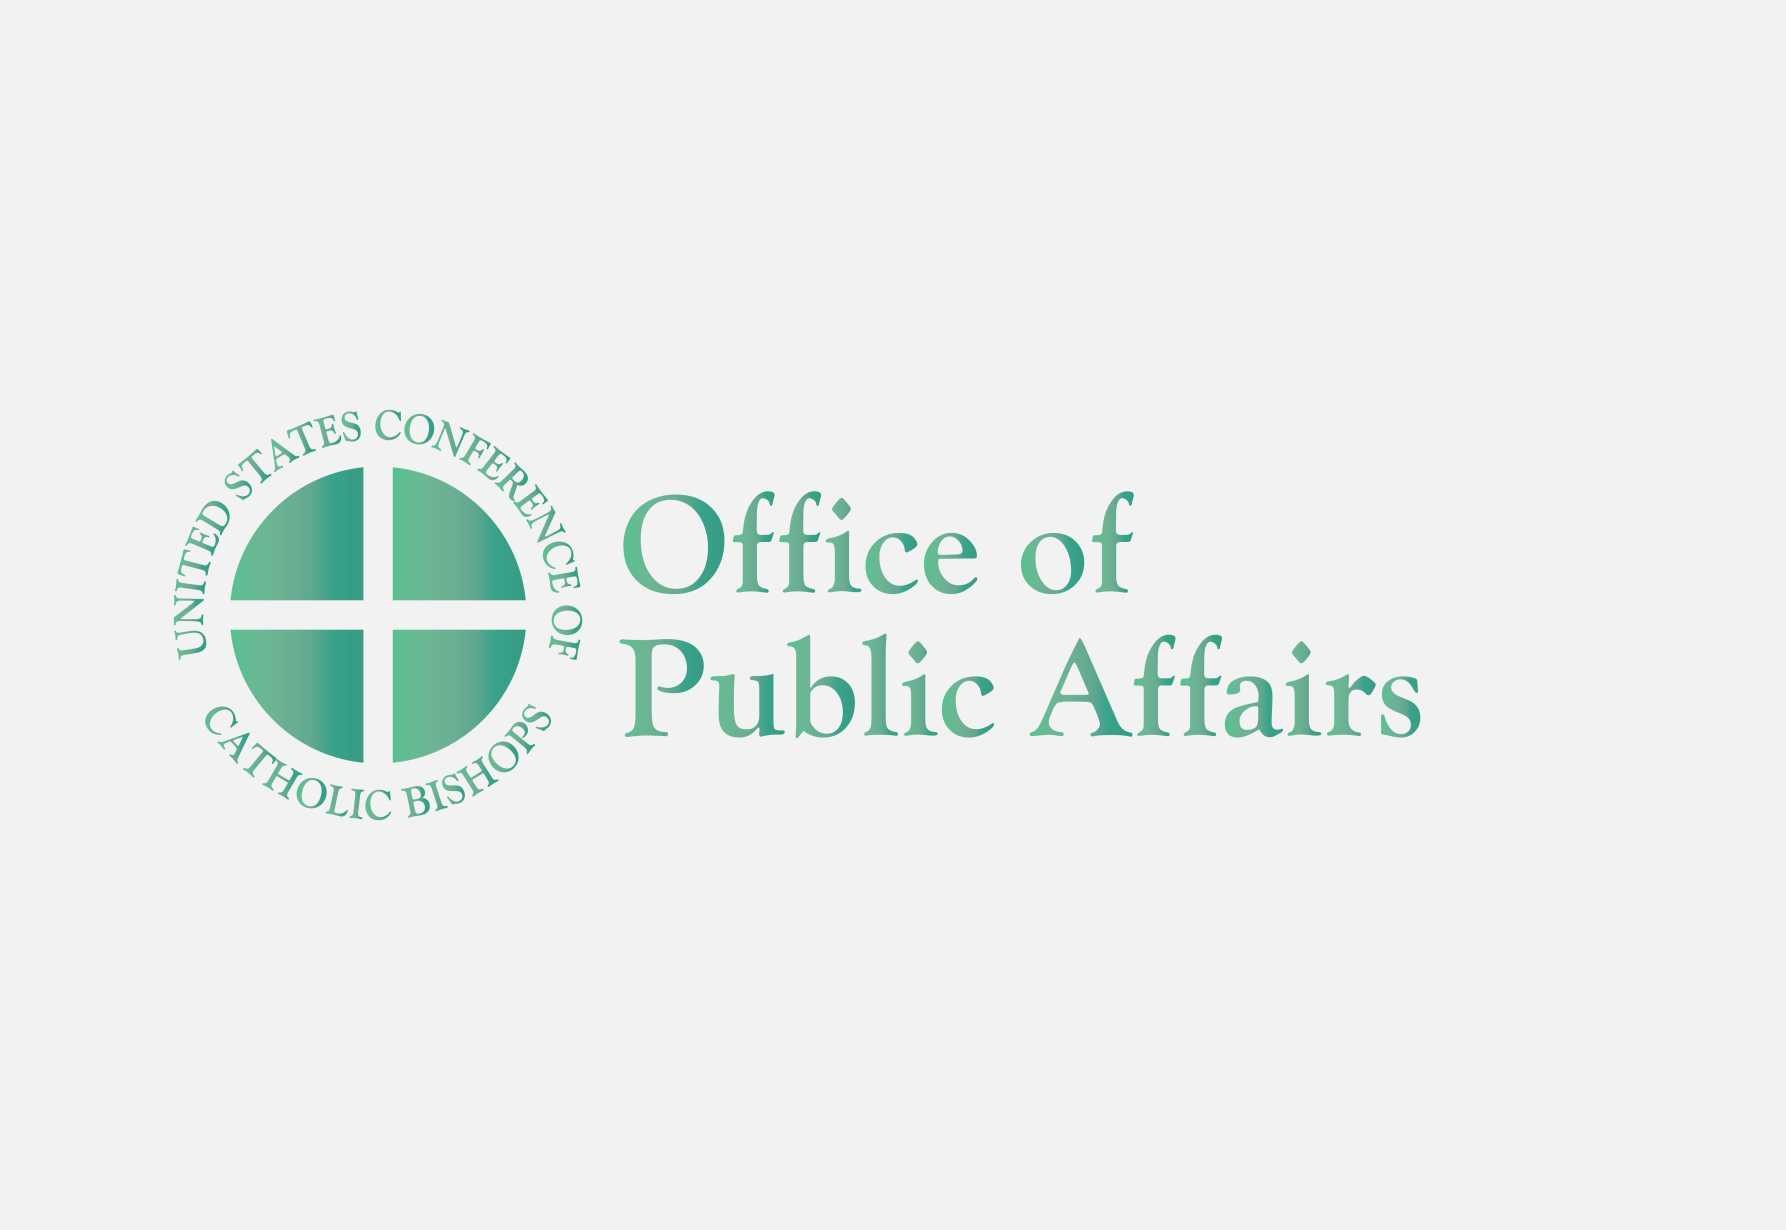 Bishops Show Commitment to “One Church One Mission” with Grants Supporting the Poor, Suffering, and Marginalized Around the World